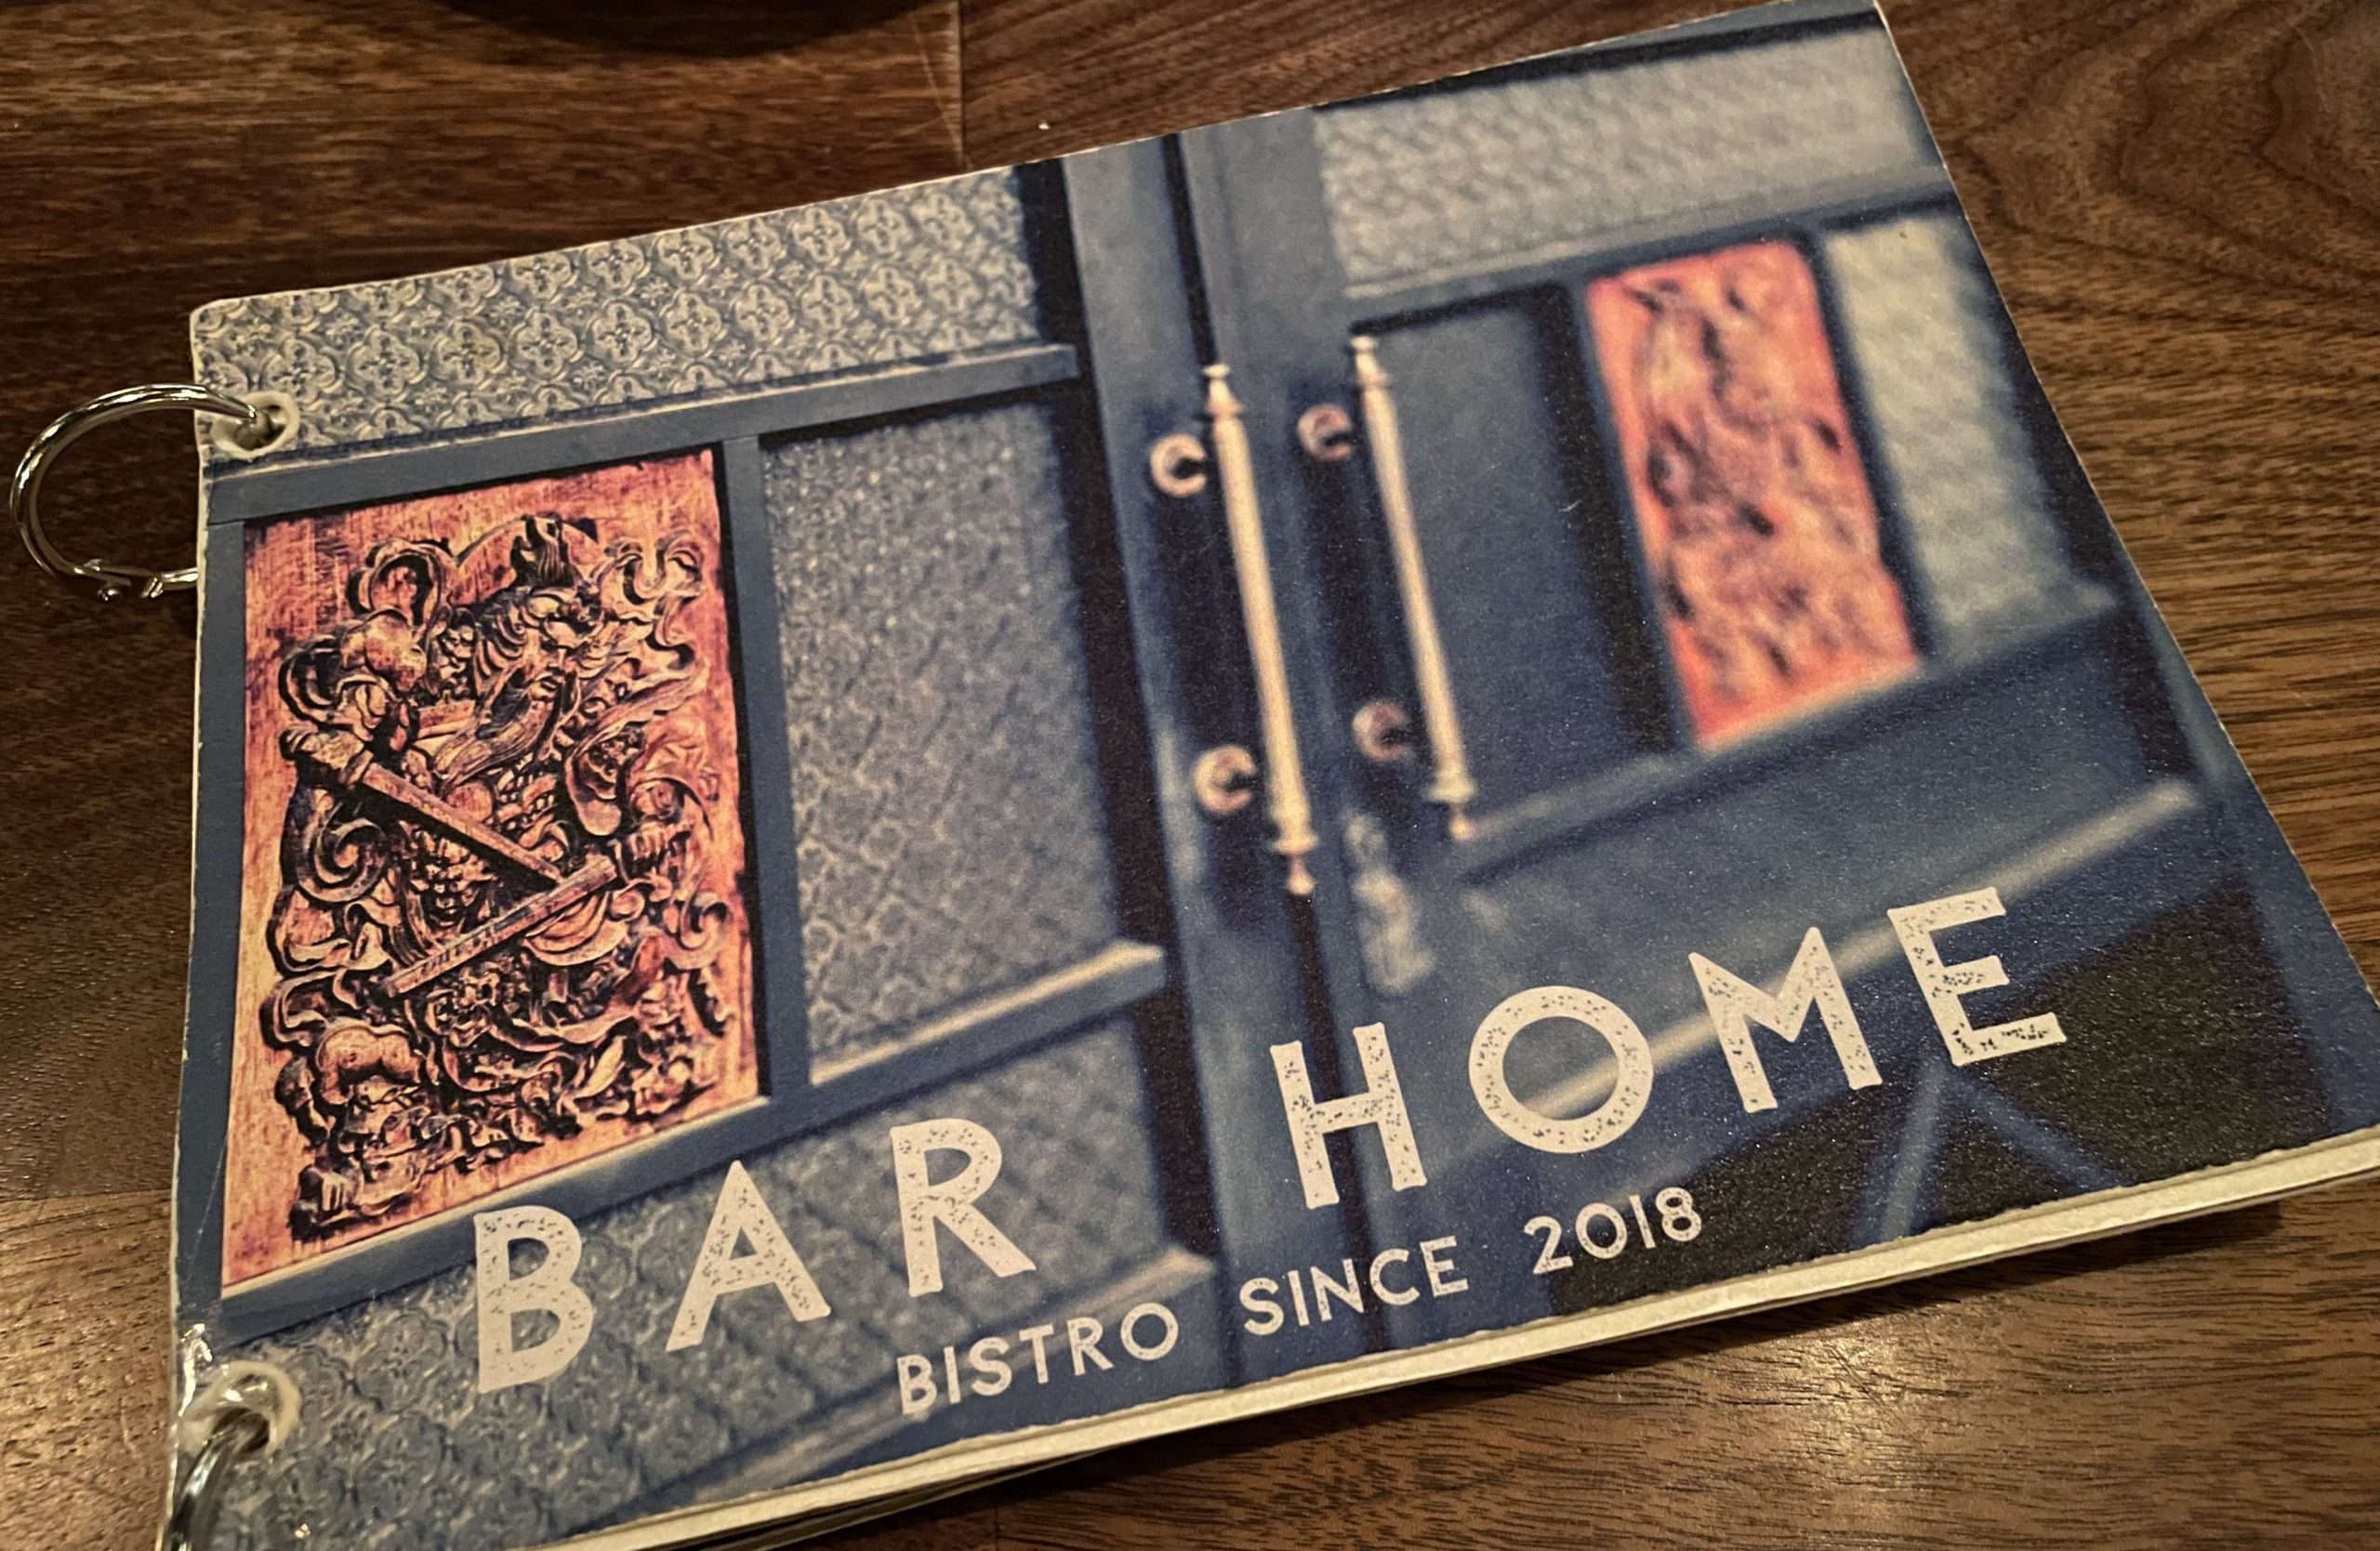 Bar Home in Tainan – Bar Bistro that feels like Home